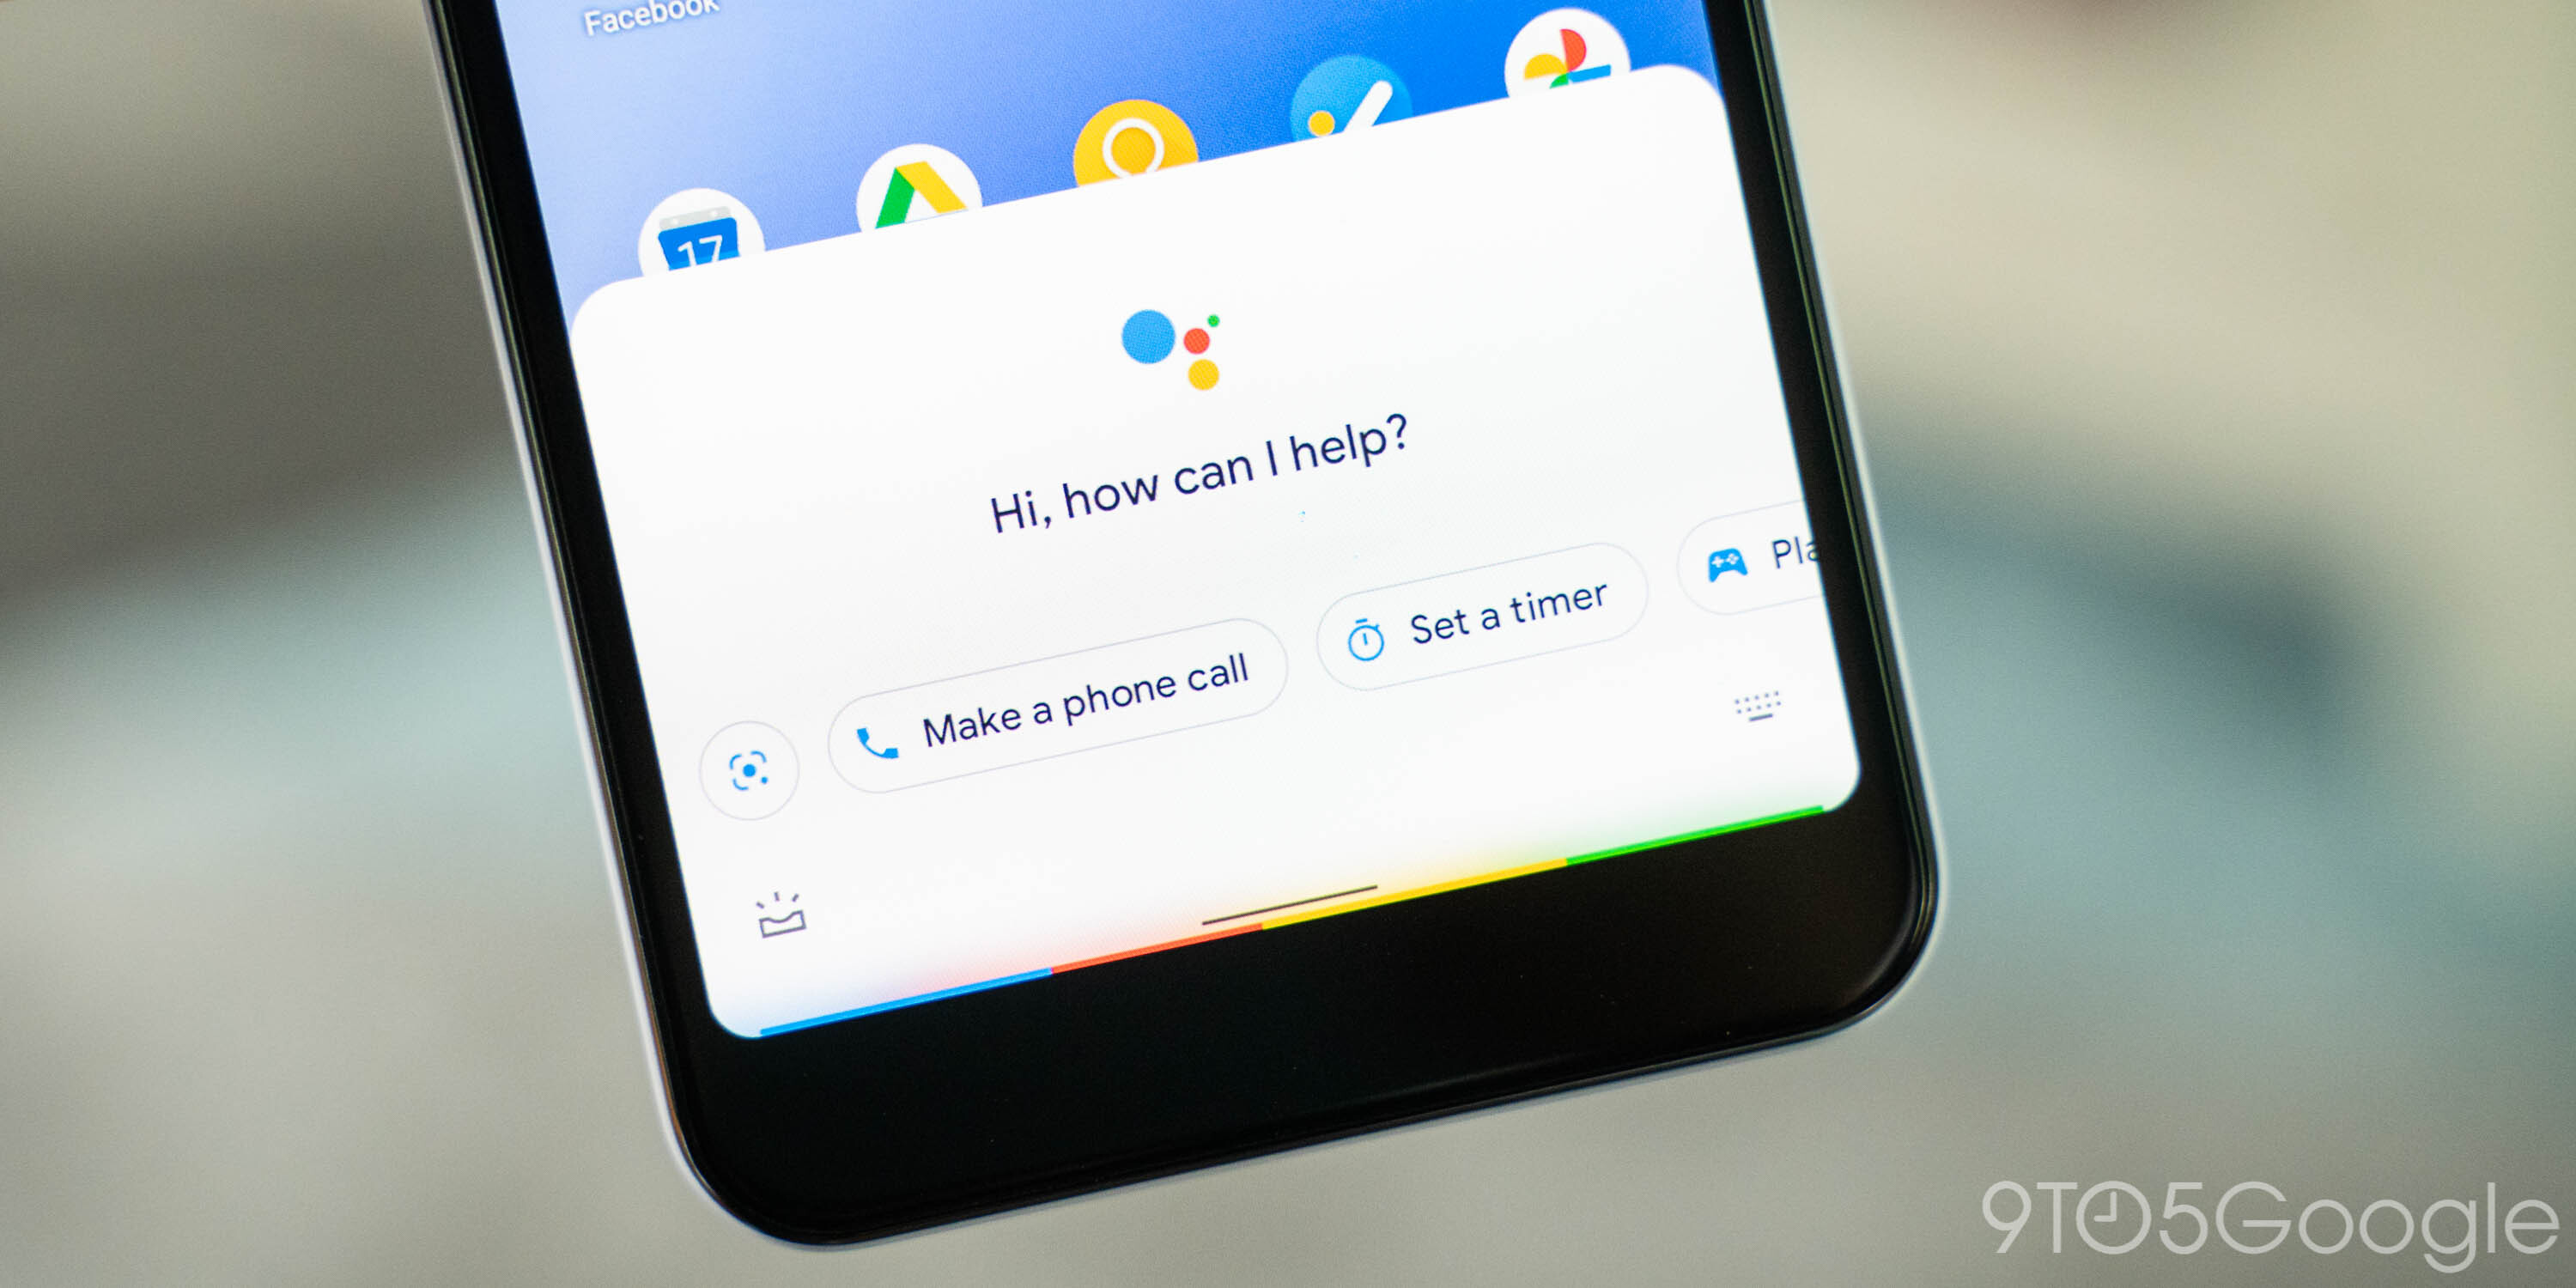 google assistant apk download for android 44